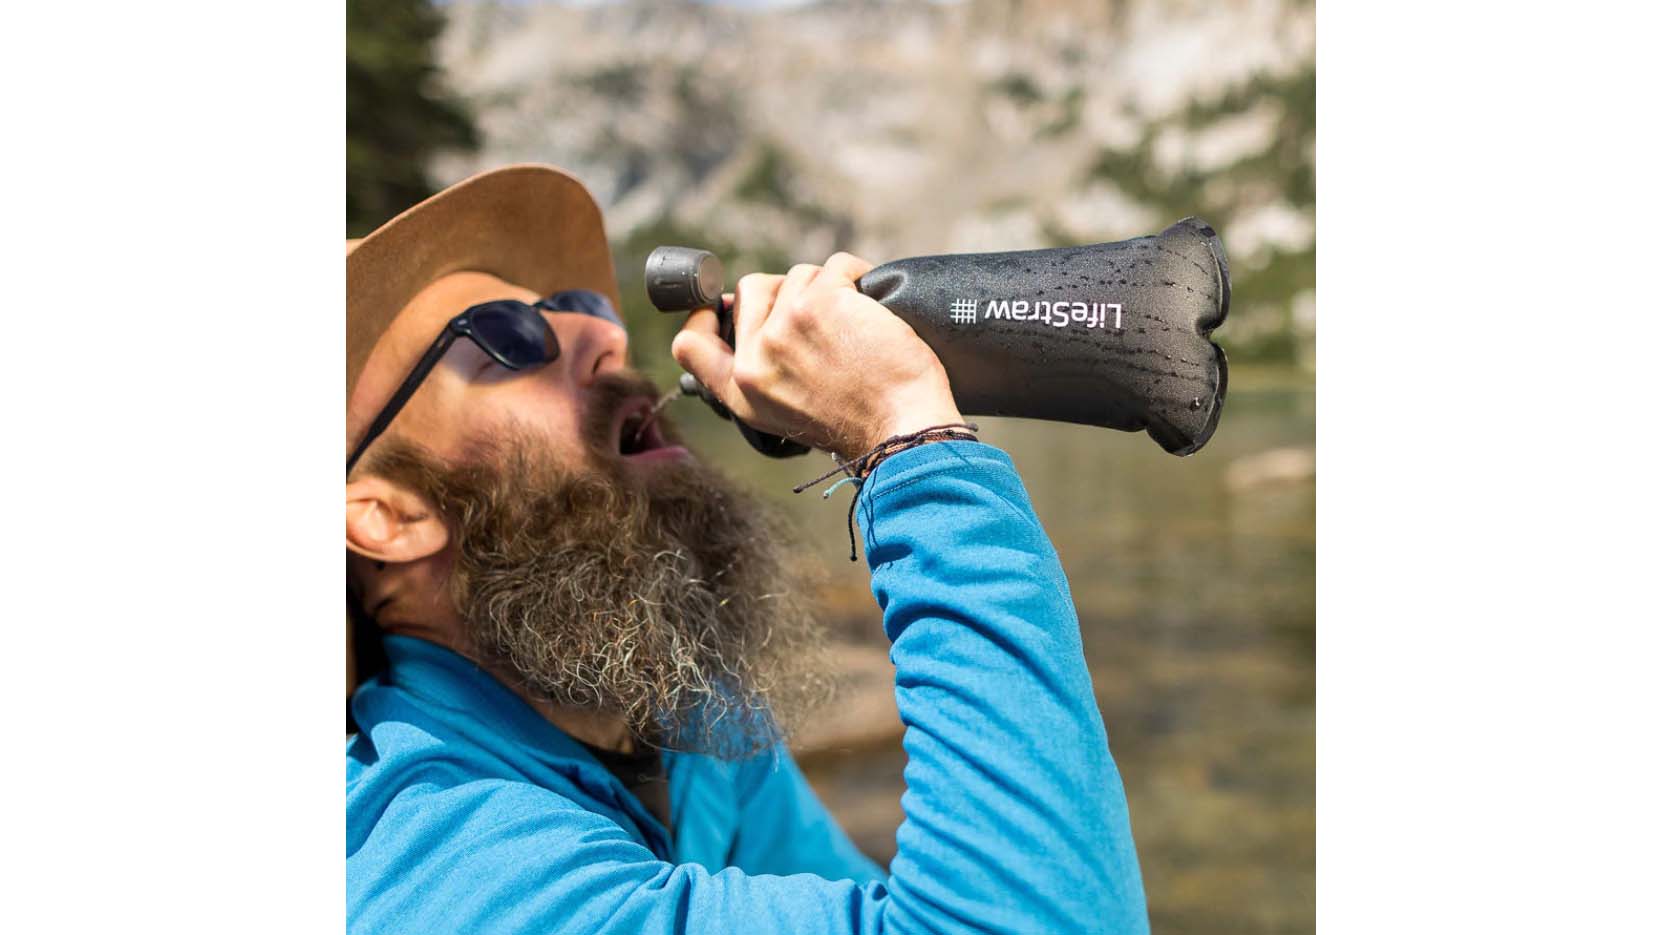 LifeStraw Water Filter Review